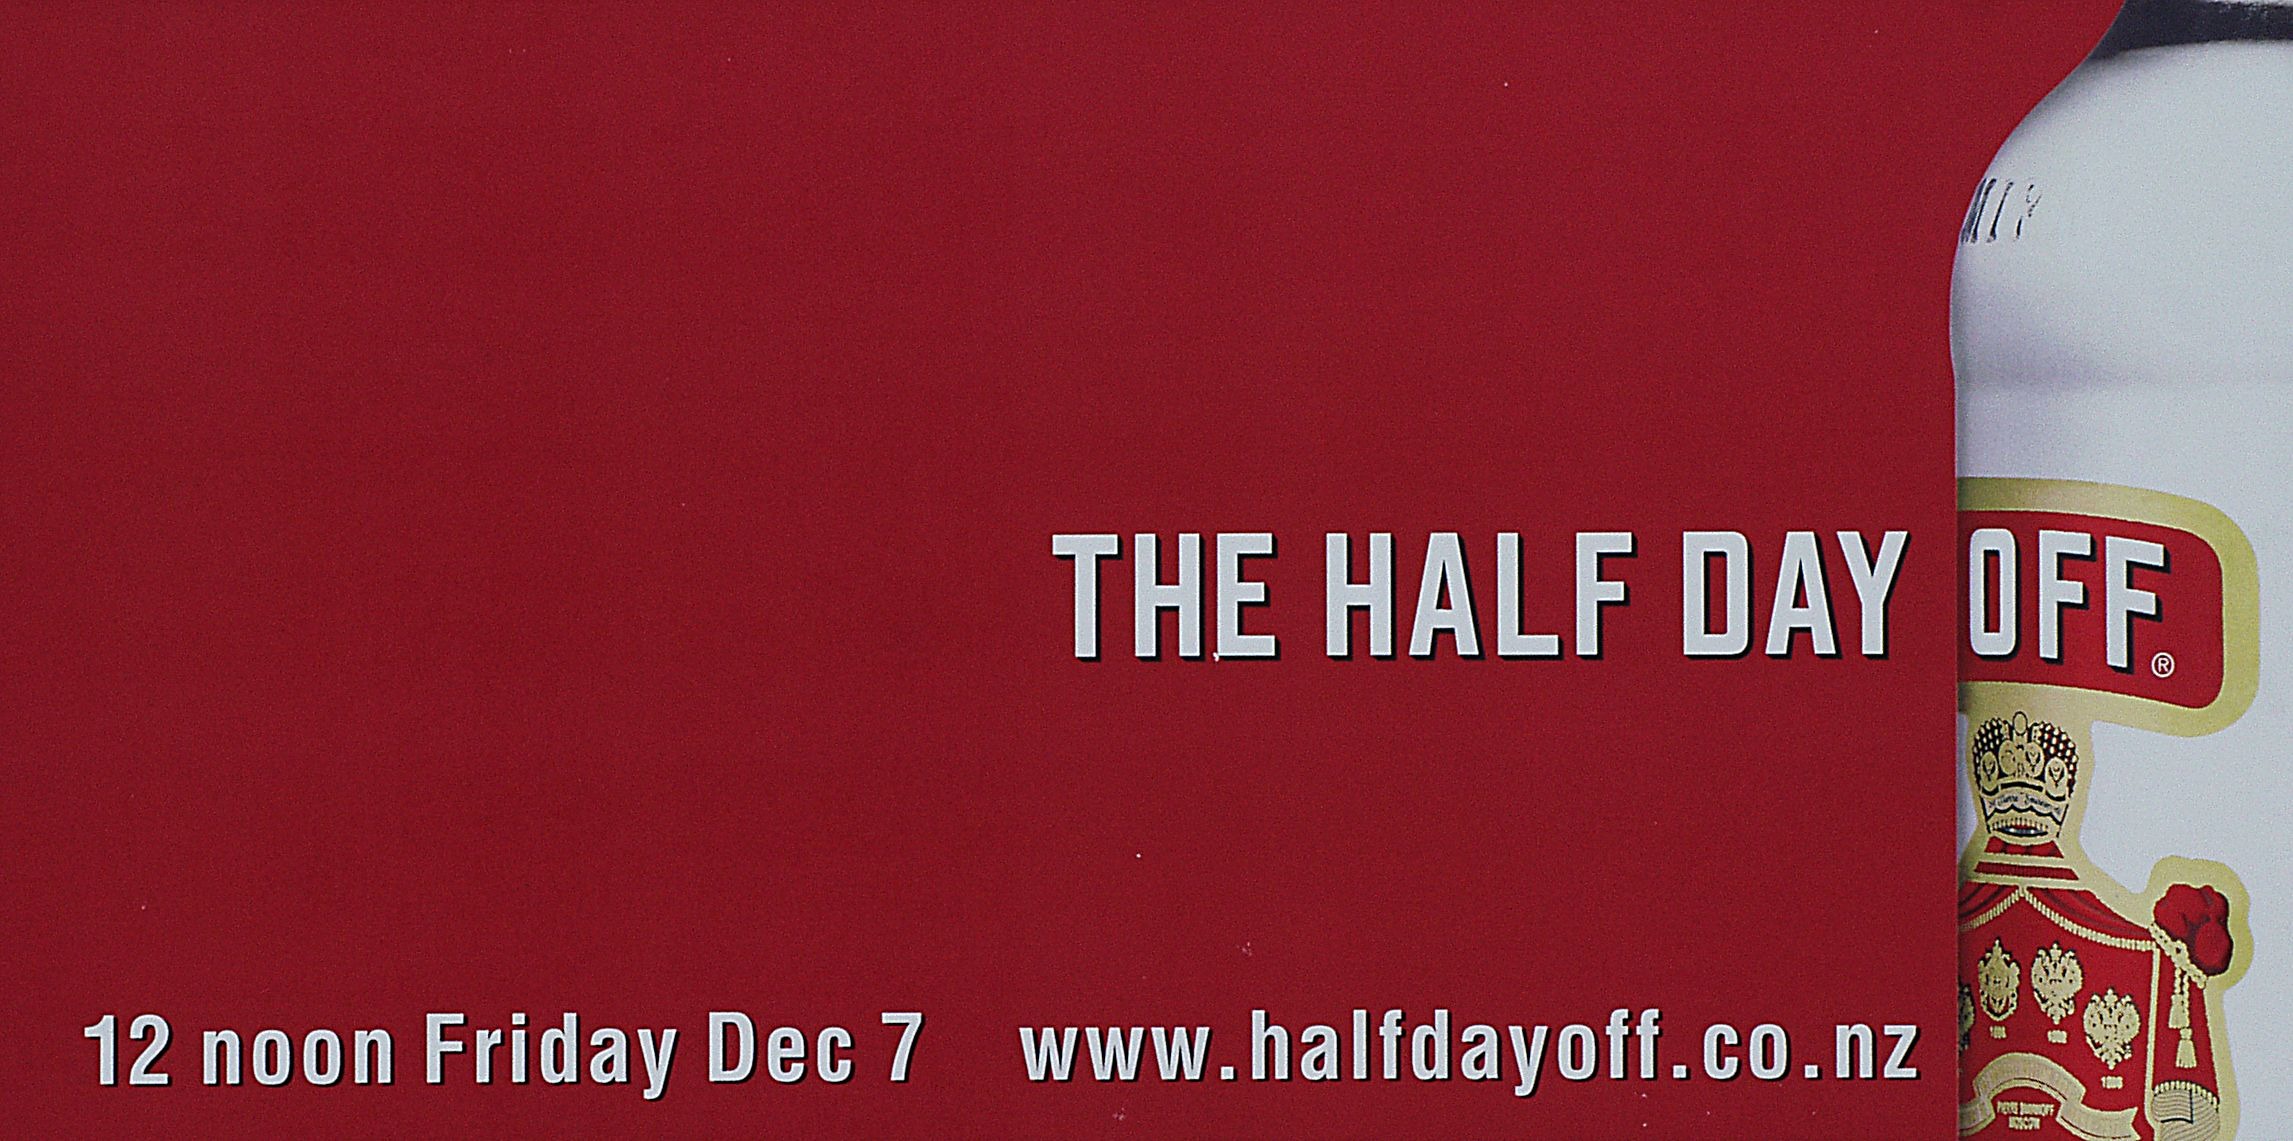 THE HALF-DAY OFF